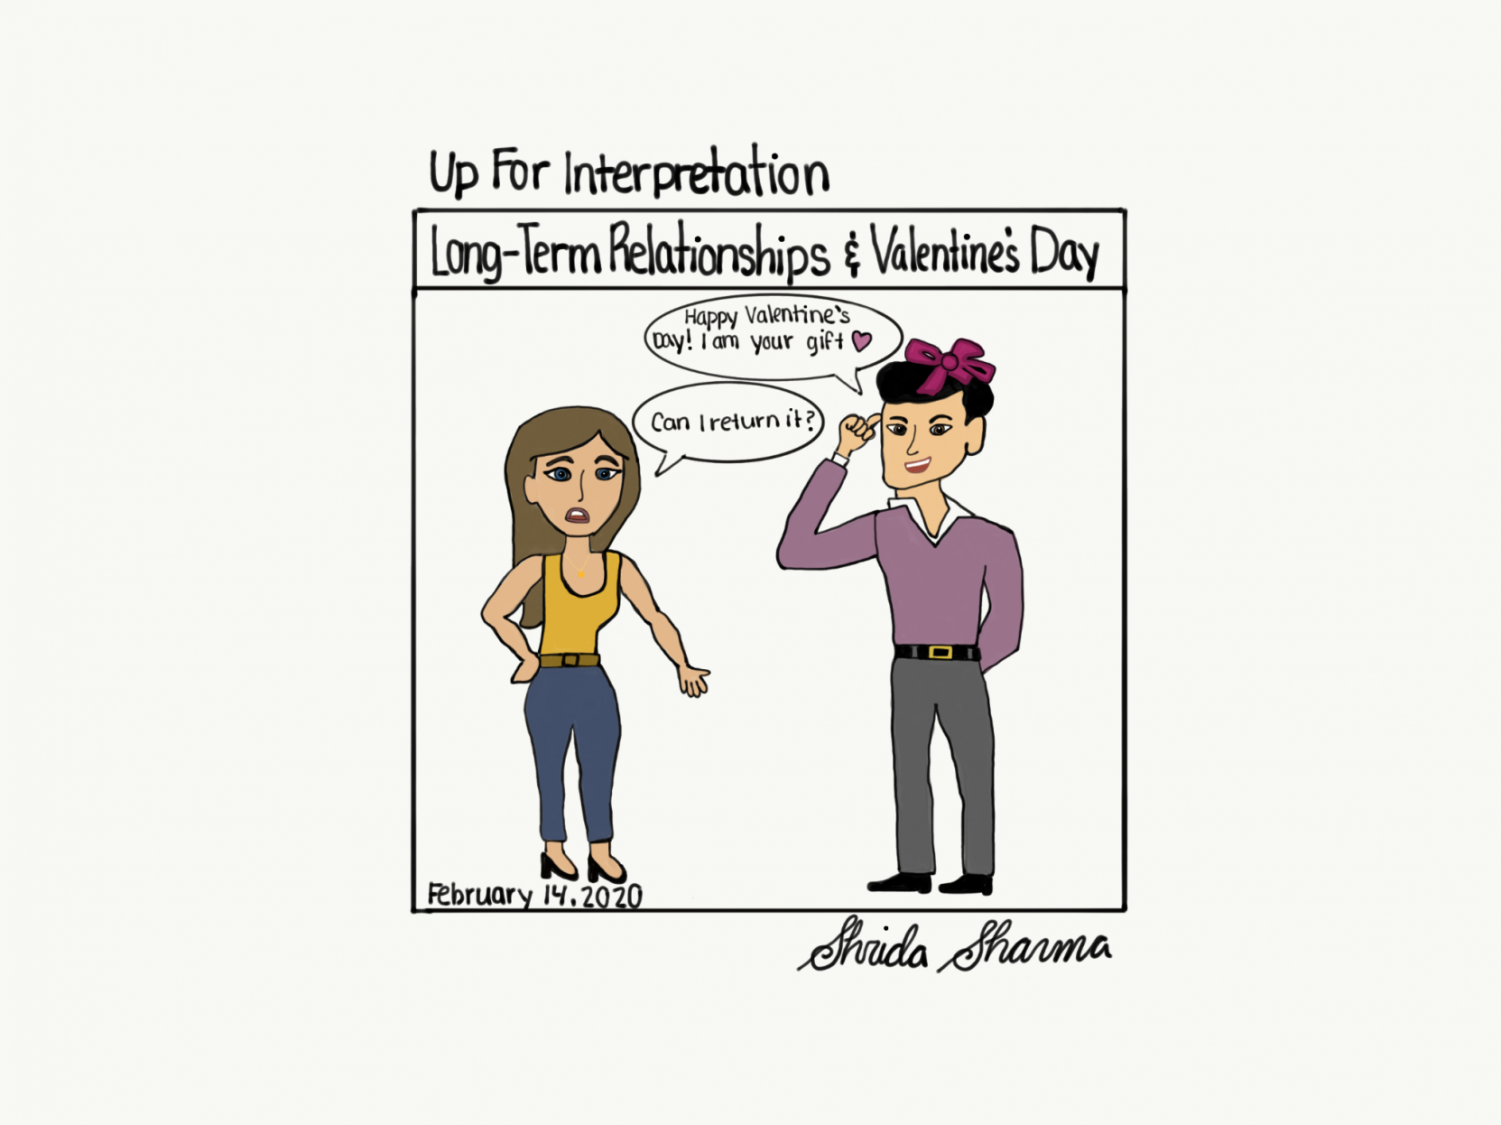 Up For Interpretation: Long-term Relationships on Valentines Day